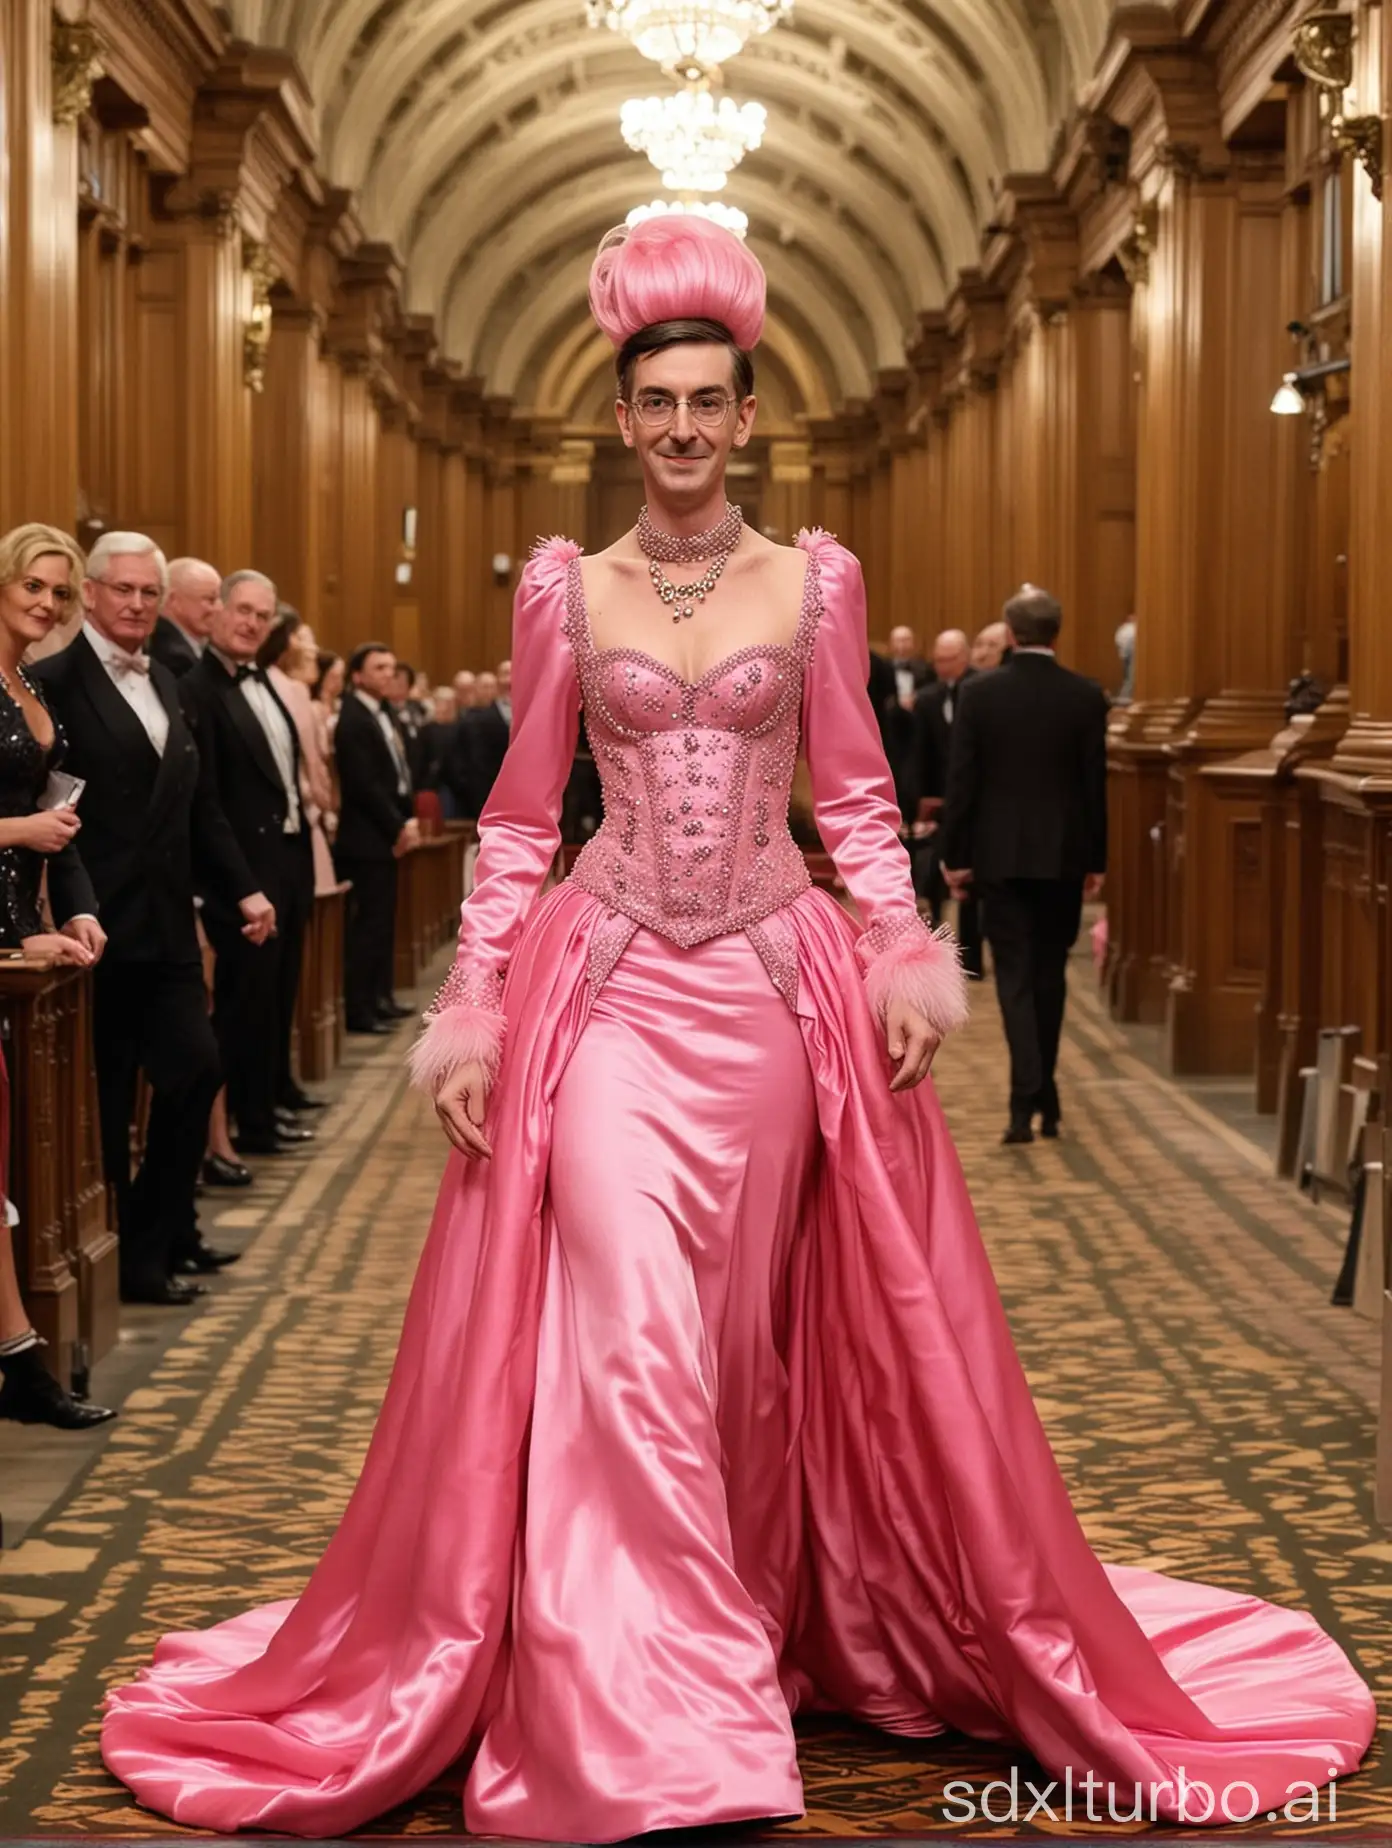 Jacob-ReesMogg-Struts-in-Parliament-Hall-as-Flamboyant-Drag-Queen